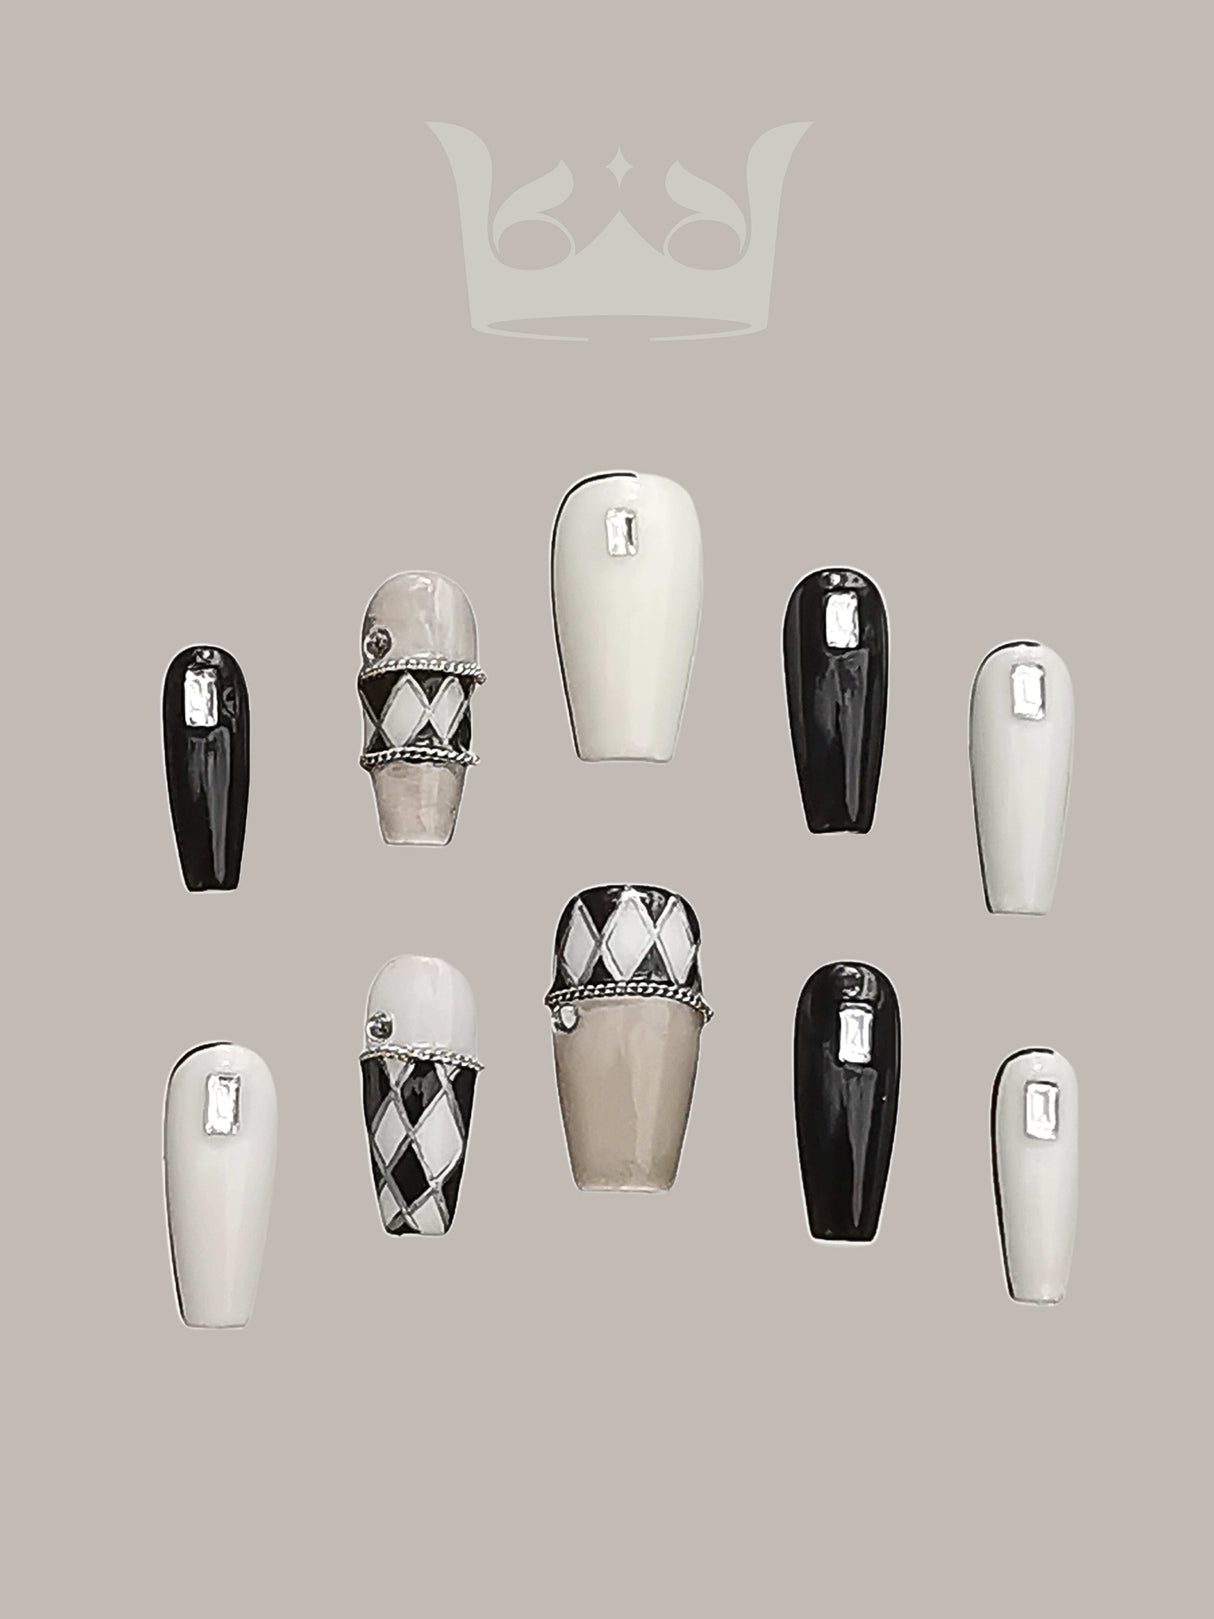 These press-on nails are for showcasing sample nail art designs for a salon or manicure specialist, with unique designs and embellishments for creativity and customization.